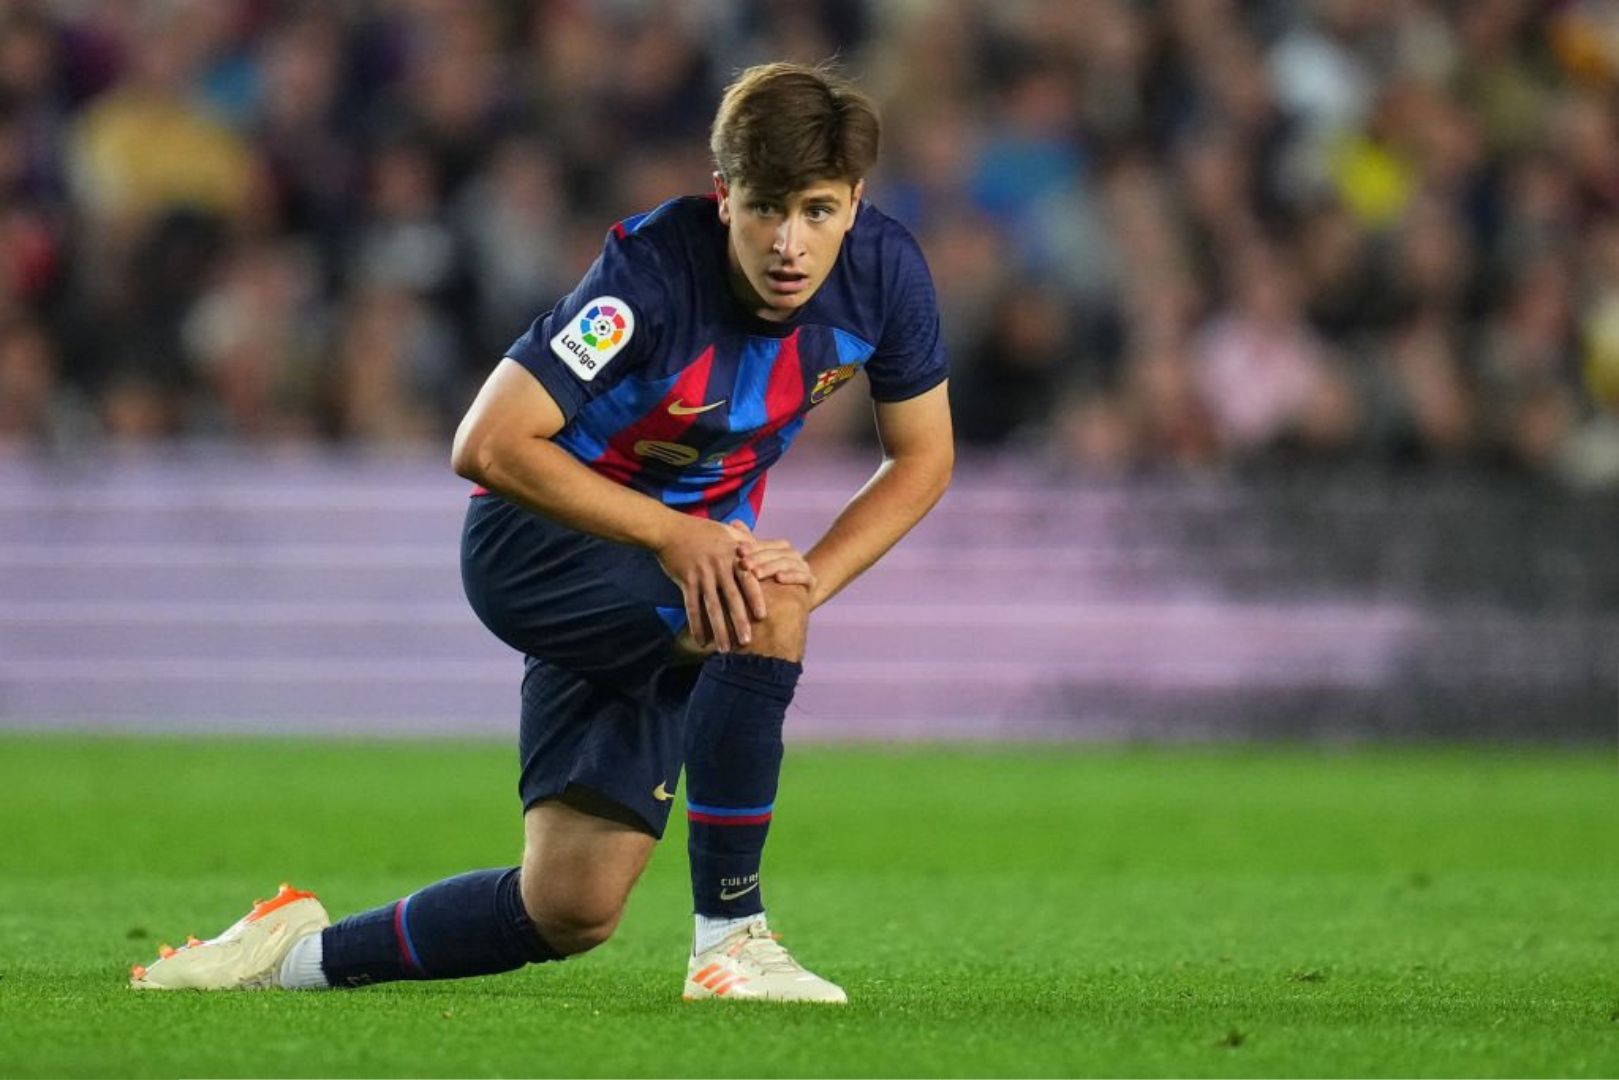 Barcelona youngster Pablo Torre